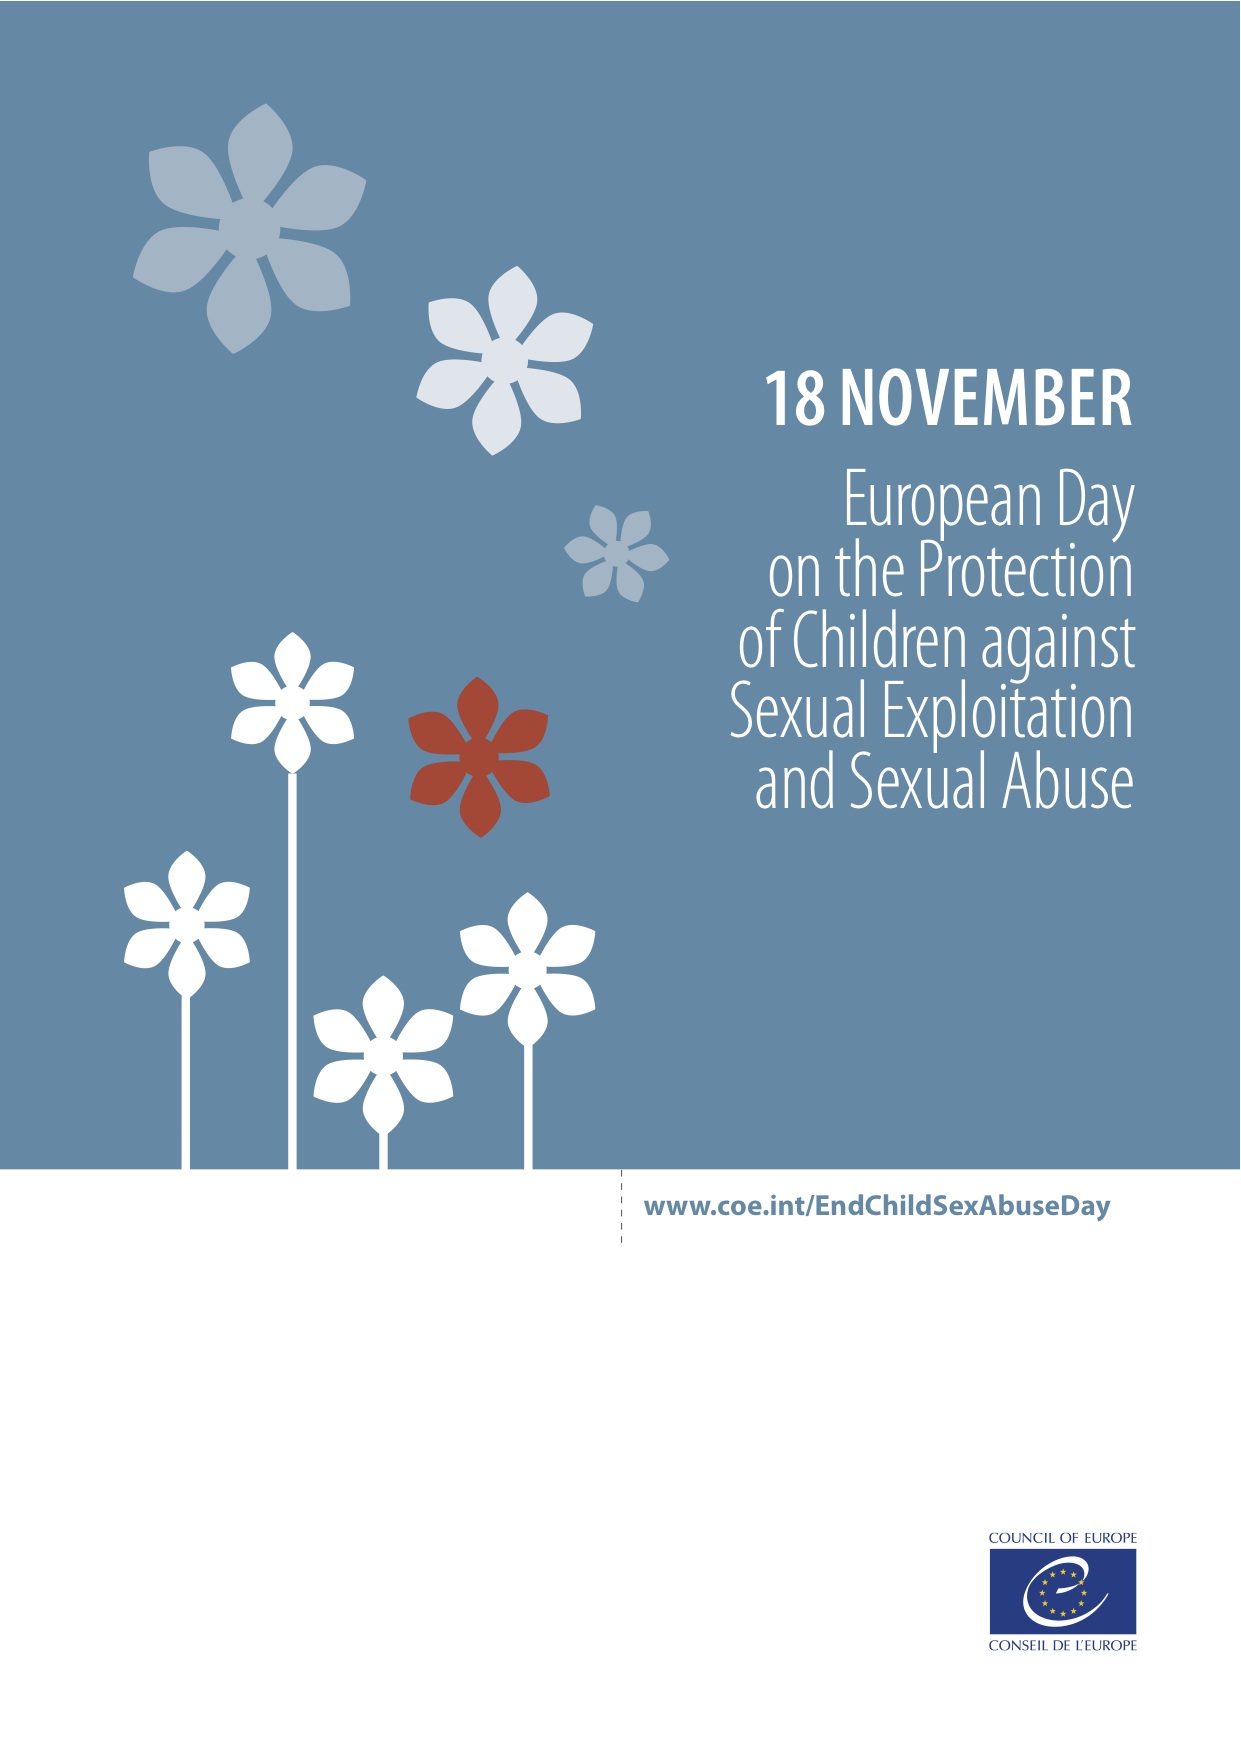 18 November European Day on the Protection of Children against Sexual Exploitation and Sexual Abuse image